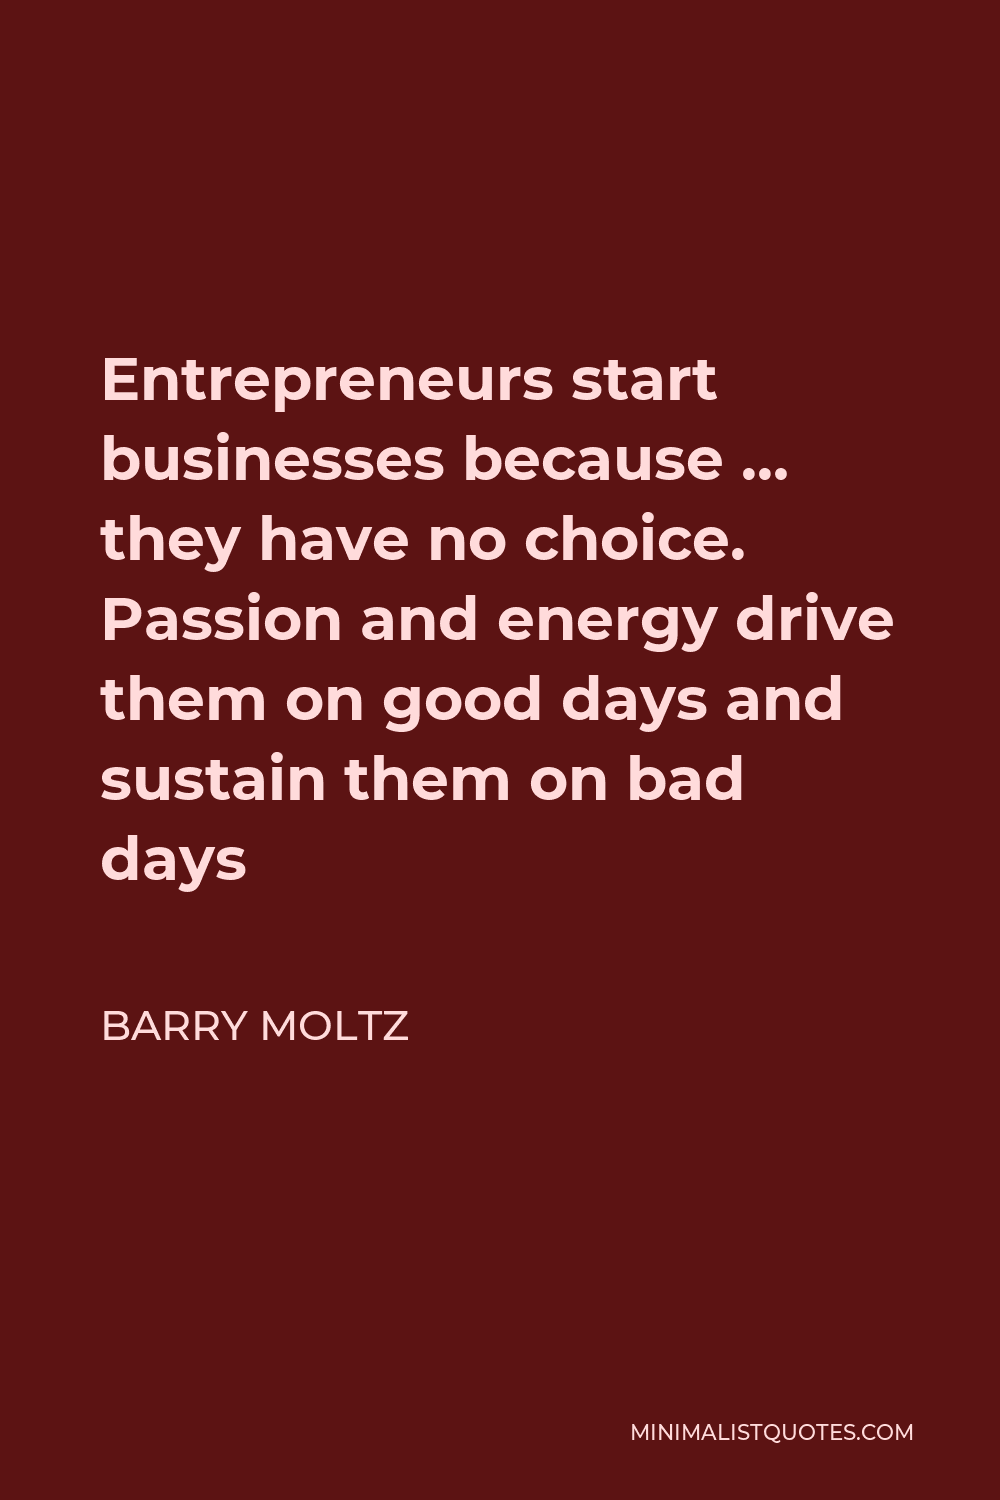 Barry Moltz Quote - Entrepreneurs start businesses because … they have no choice. Passion and energy drive them on good days and sustain them on bad days